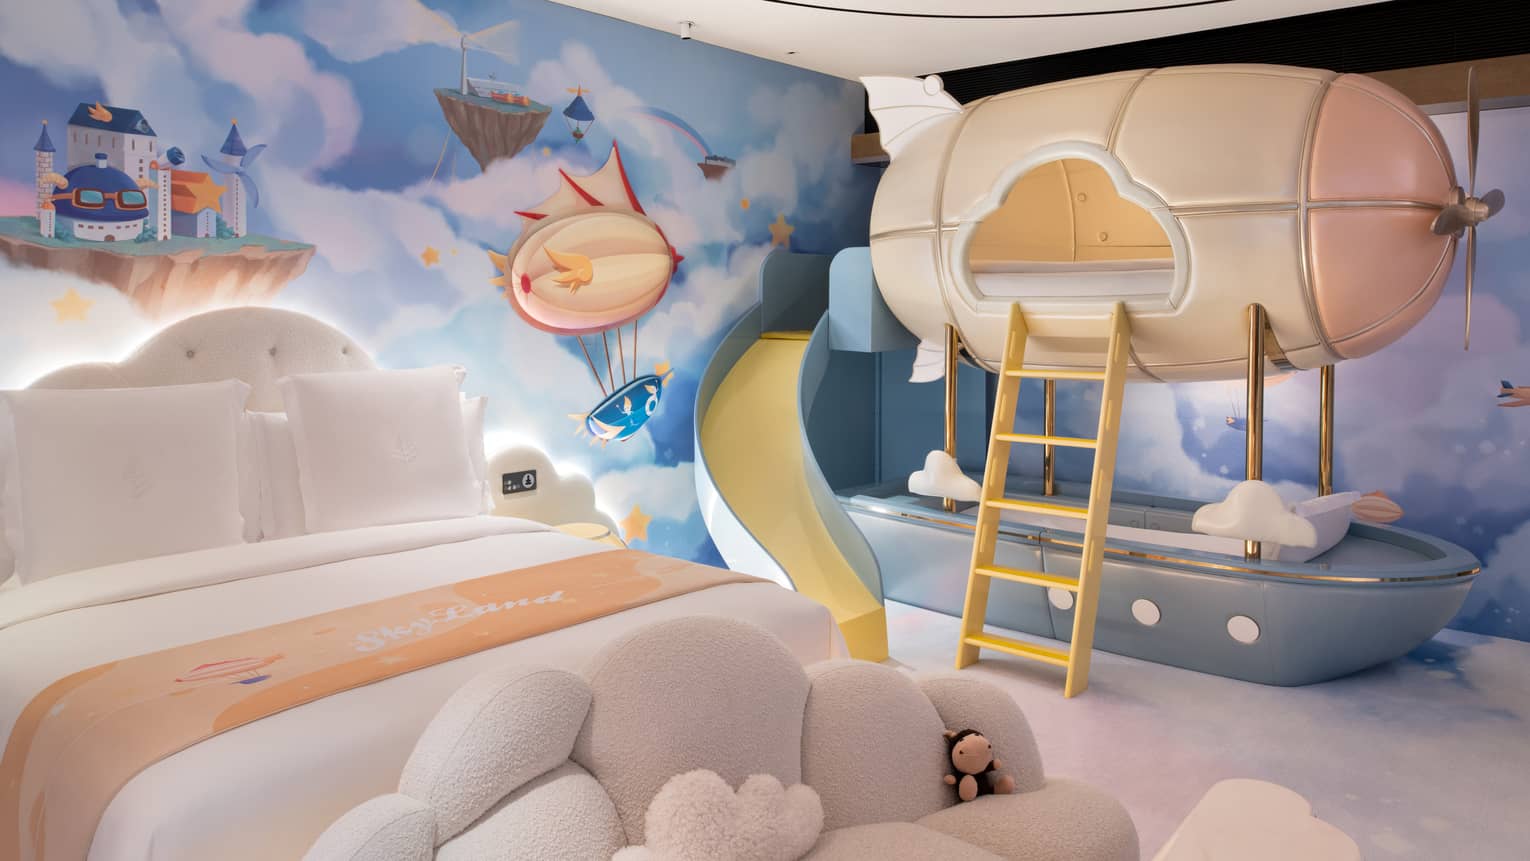 Family room with sky-inspired theme, adult bed and blimp-shaped bunk bed